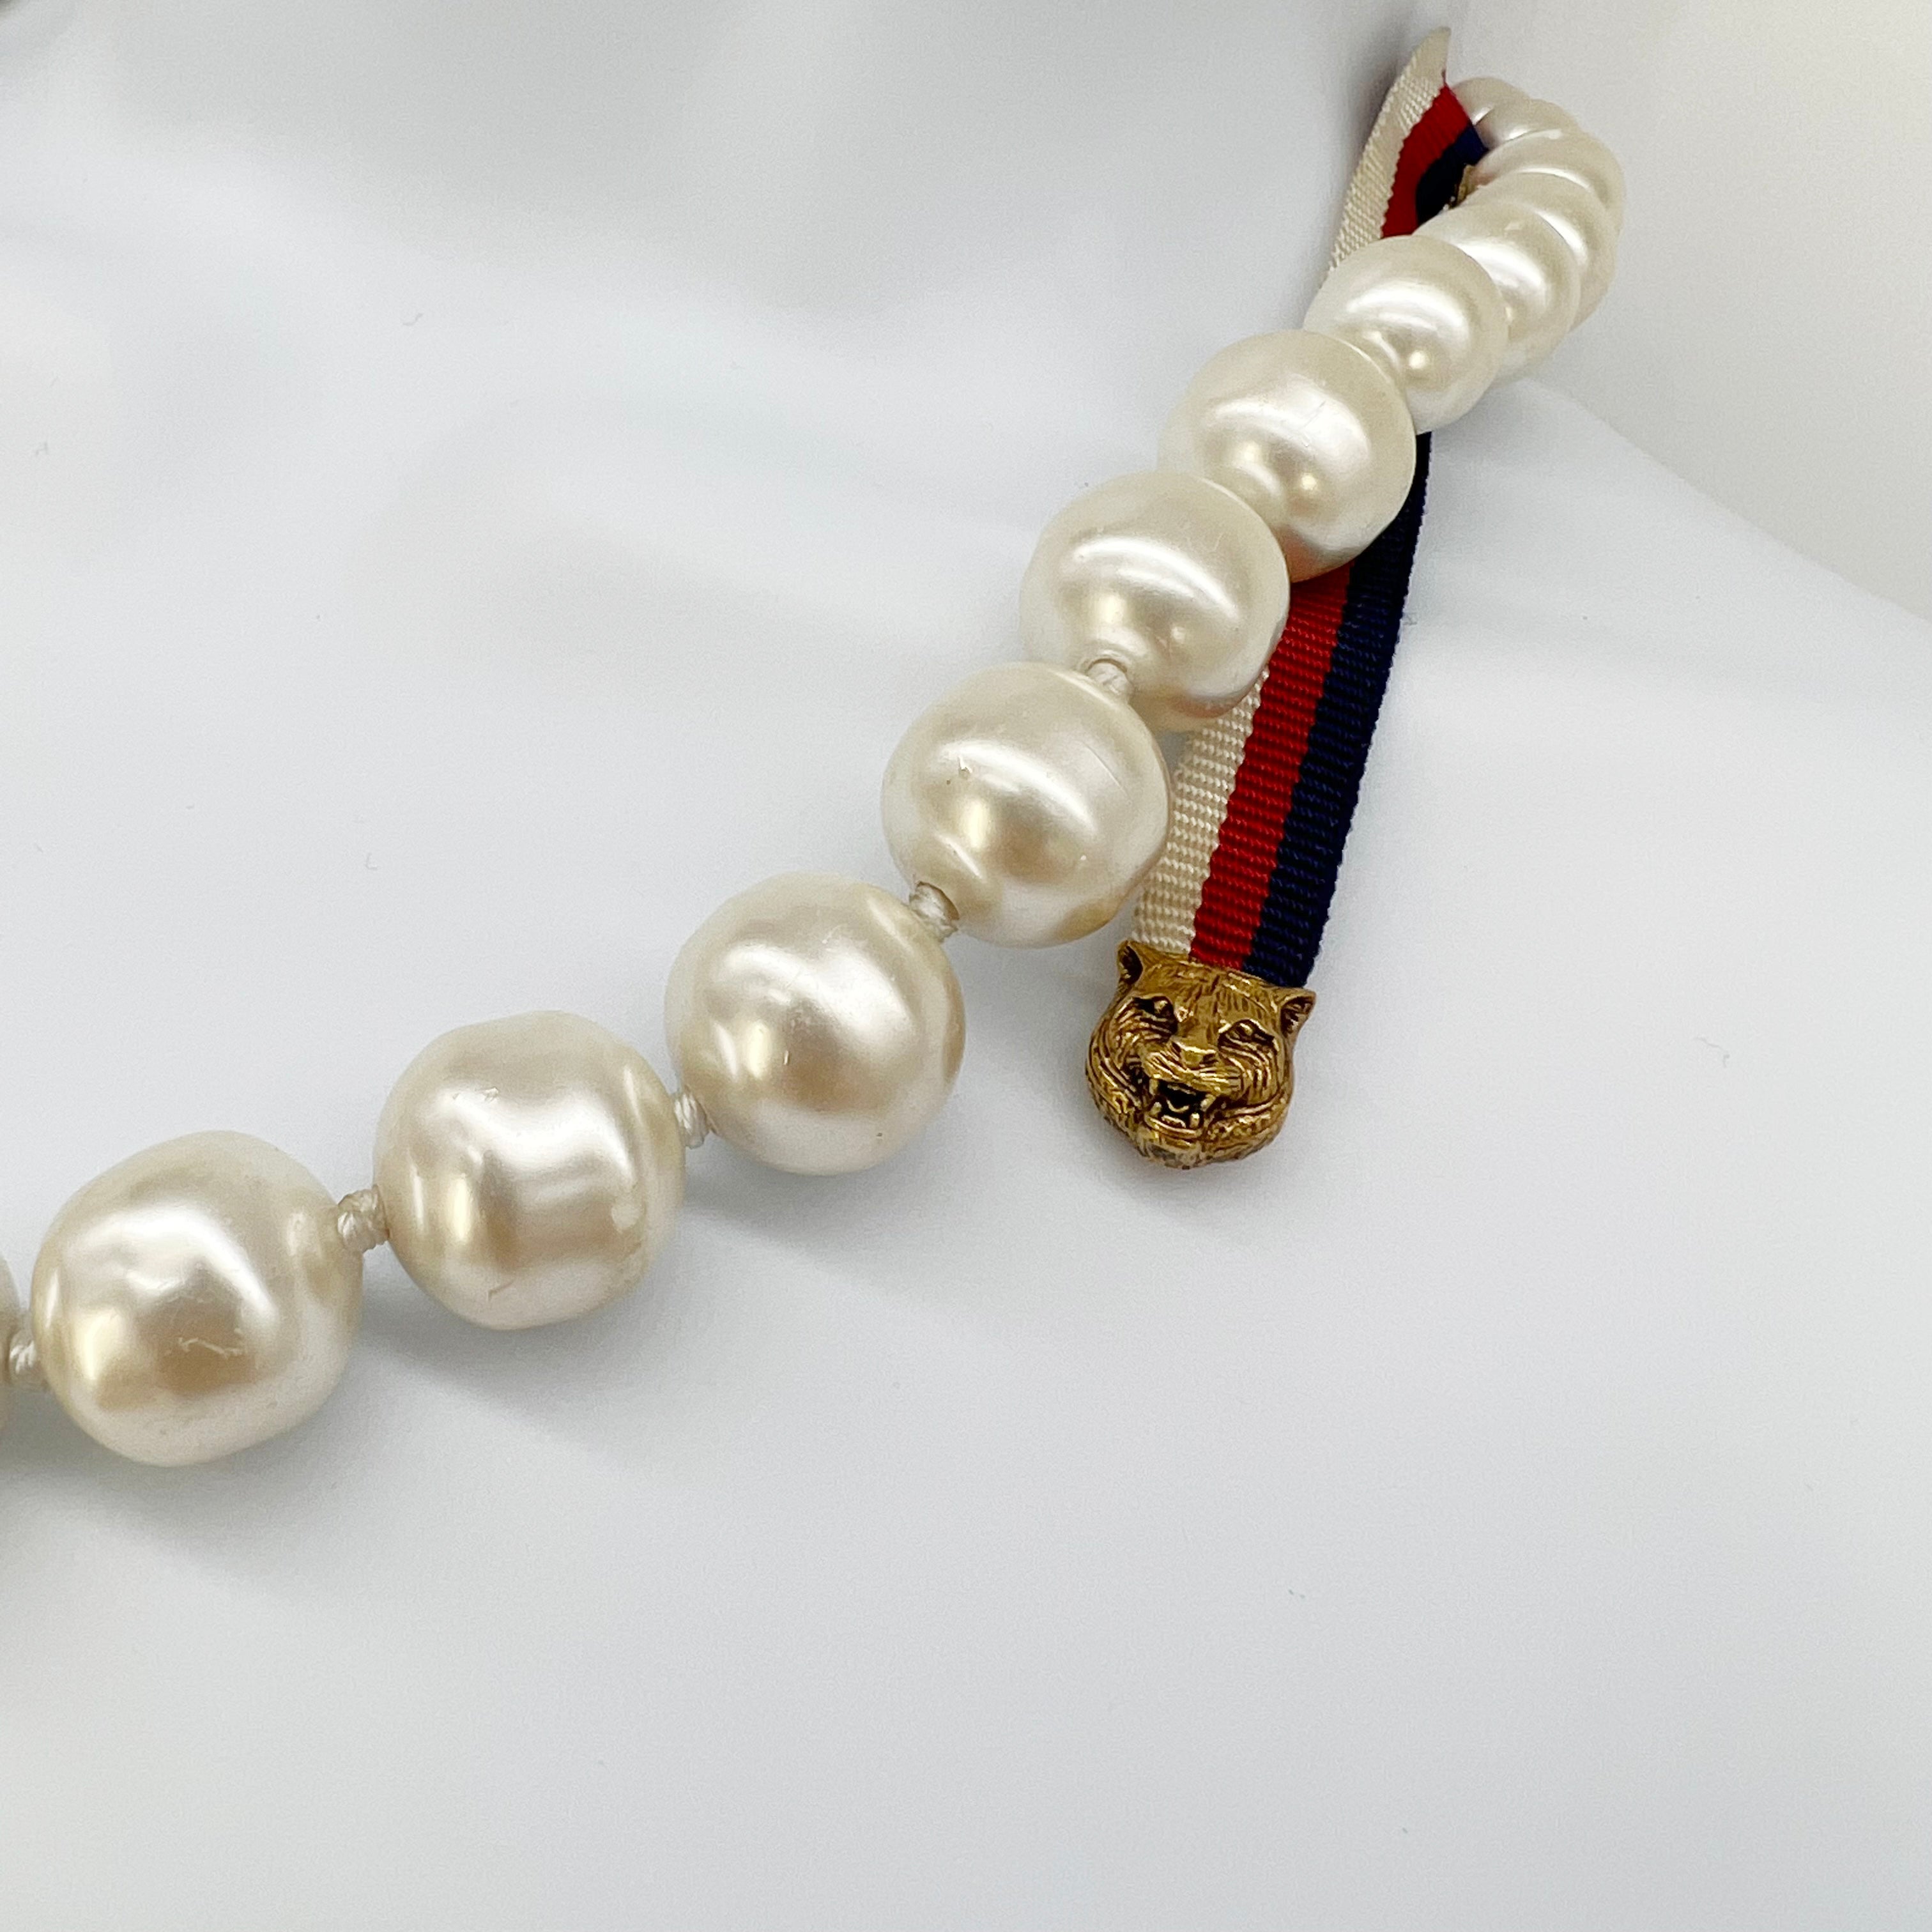 Guaranteed Authentic Gucci Faux Pearl Necklace with Ribbon with Feline Head Appx 10"